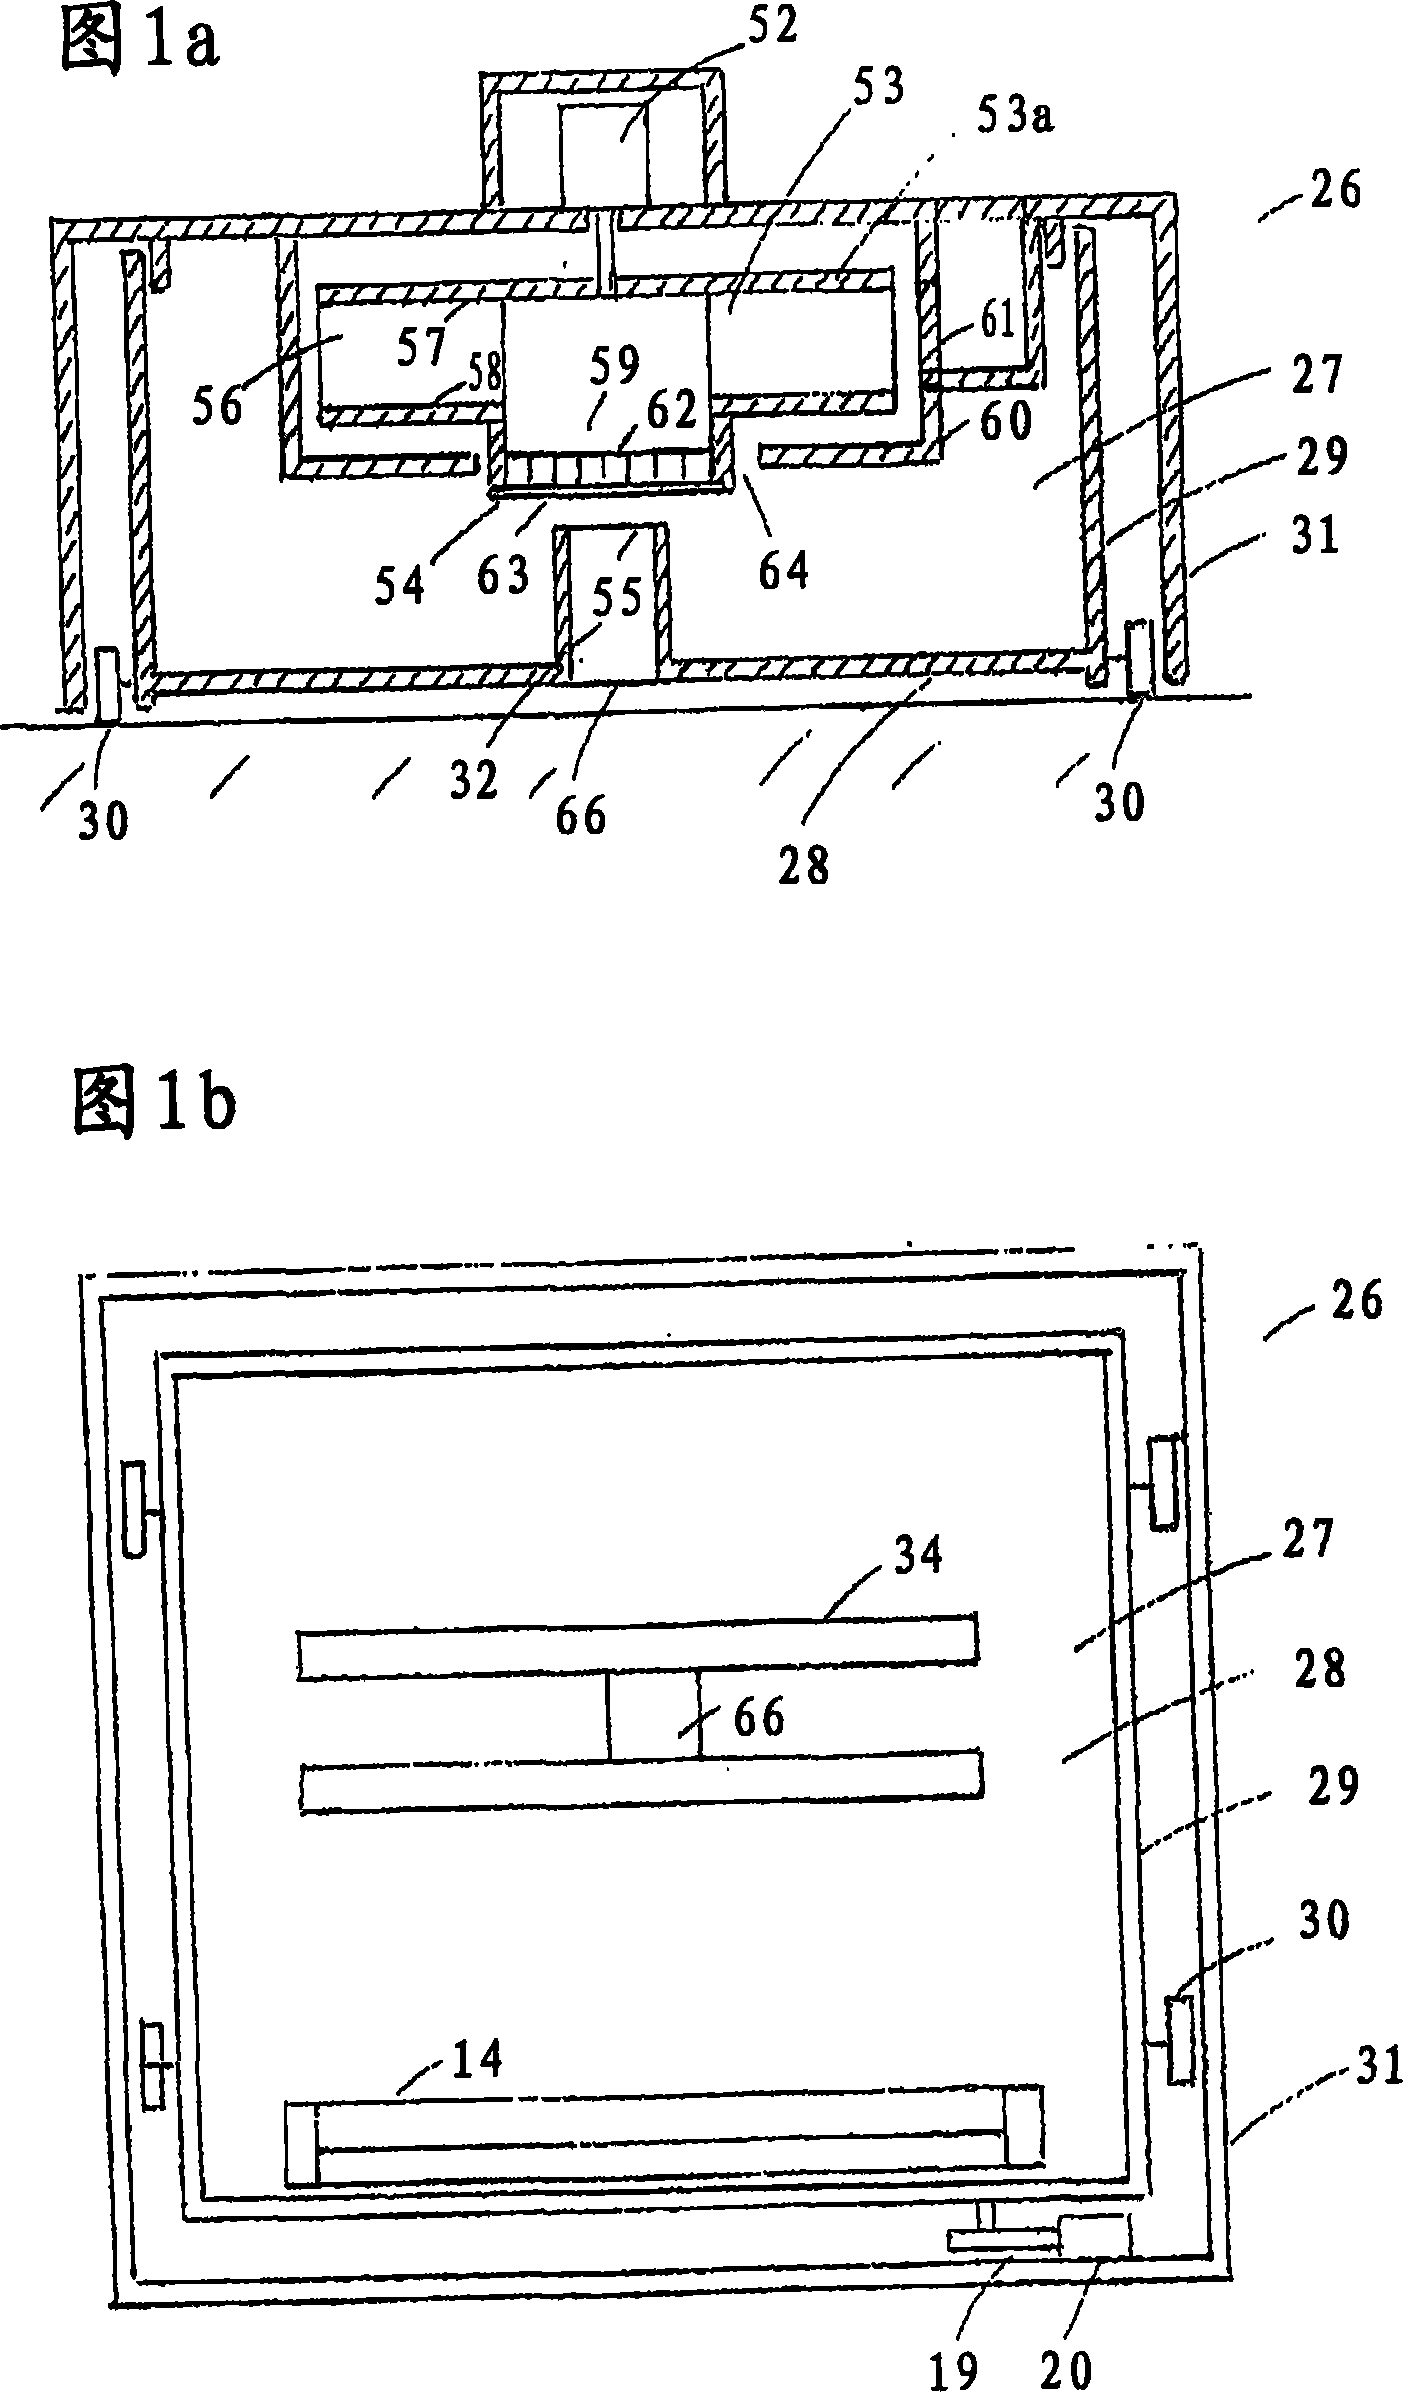 Cleaning and sterilizing apparatus combined with an ultra-violet lamp